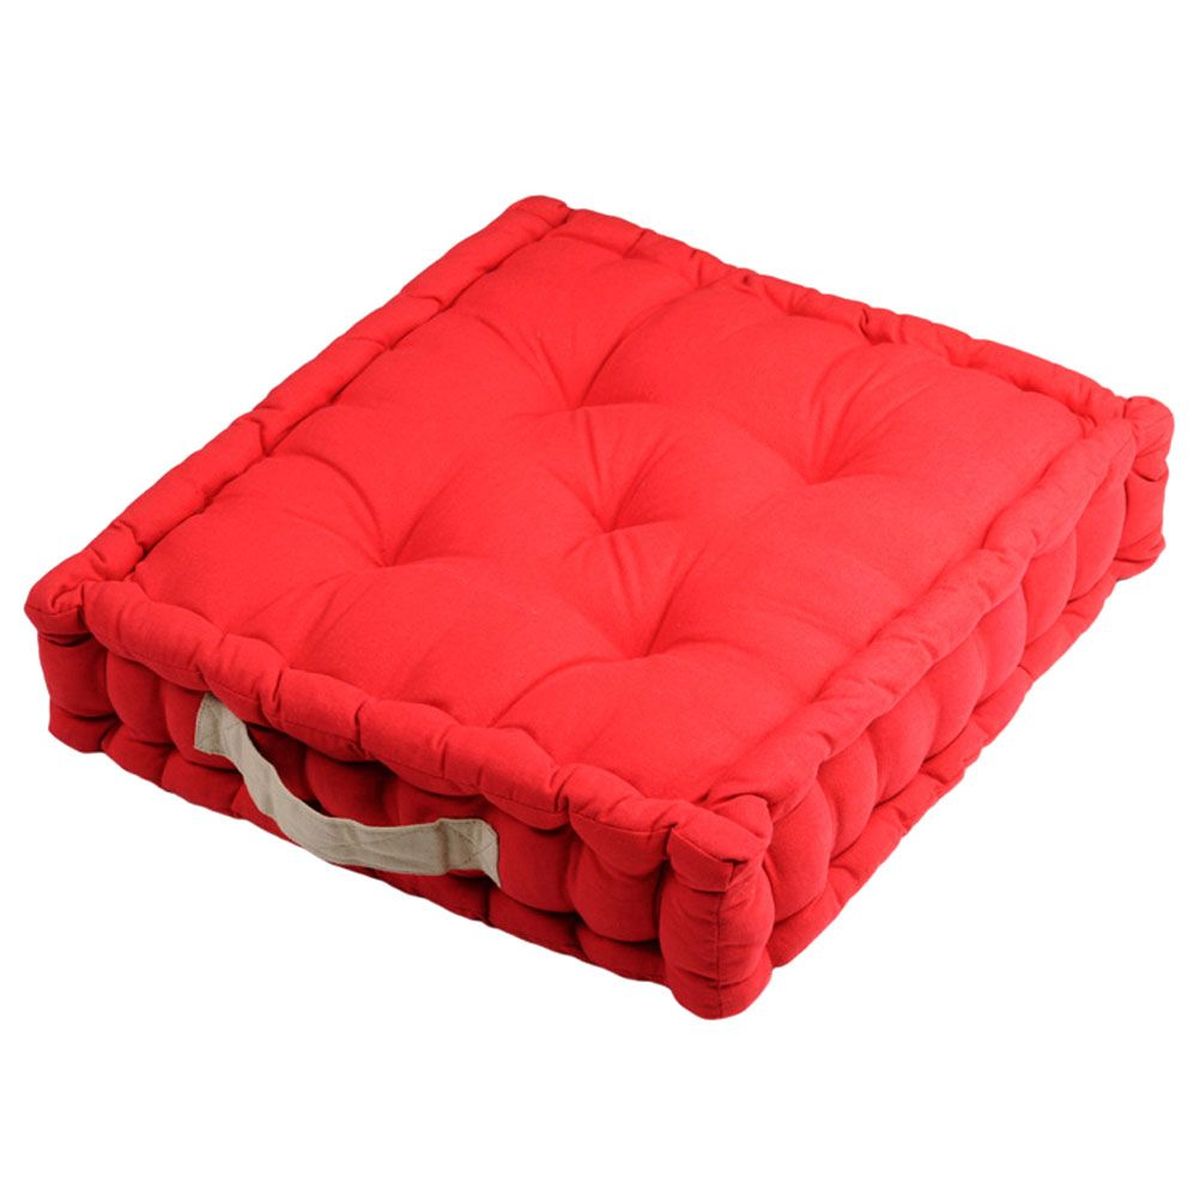 Cotton Floor Cushion Red and Lin 45 cm